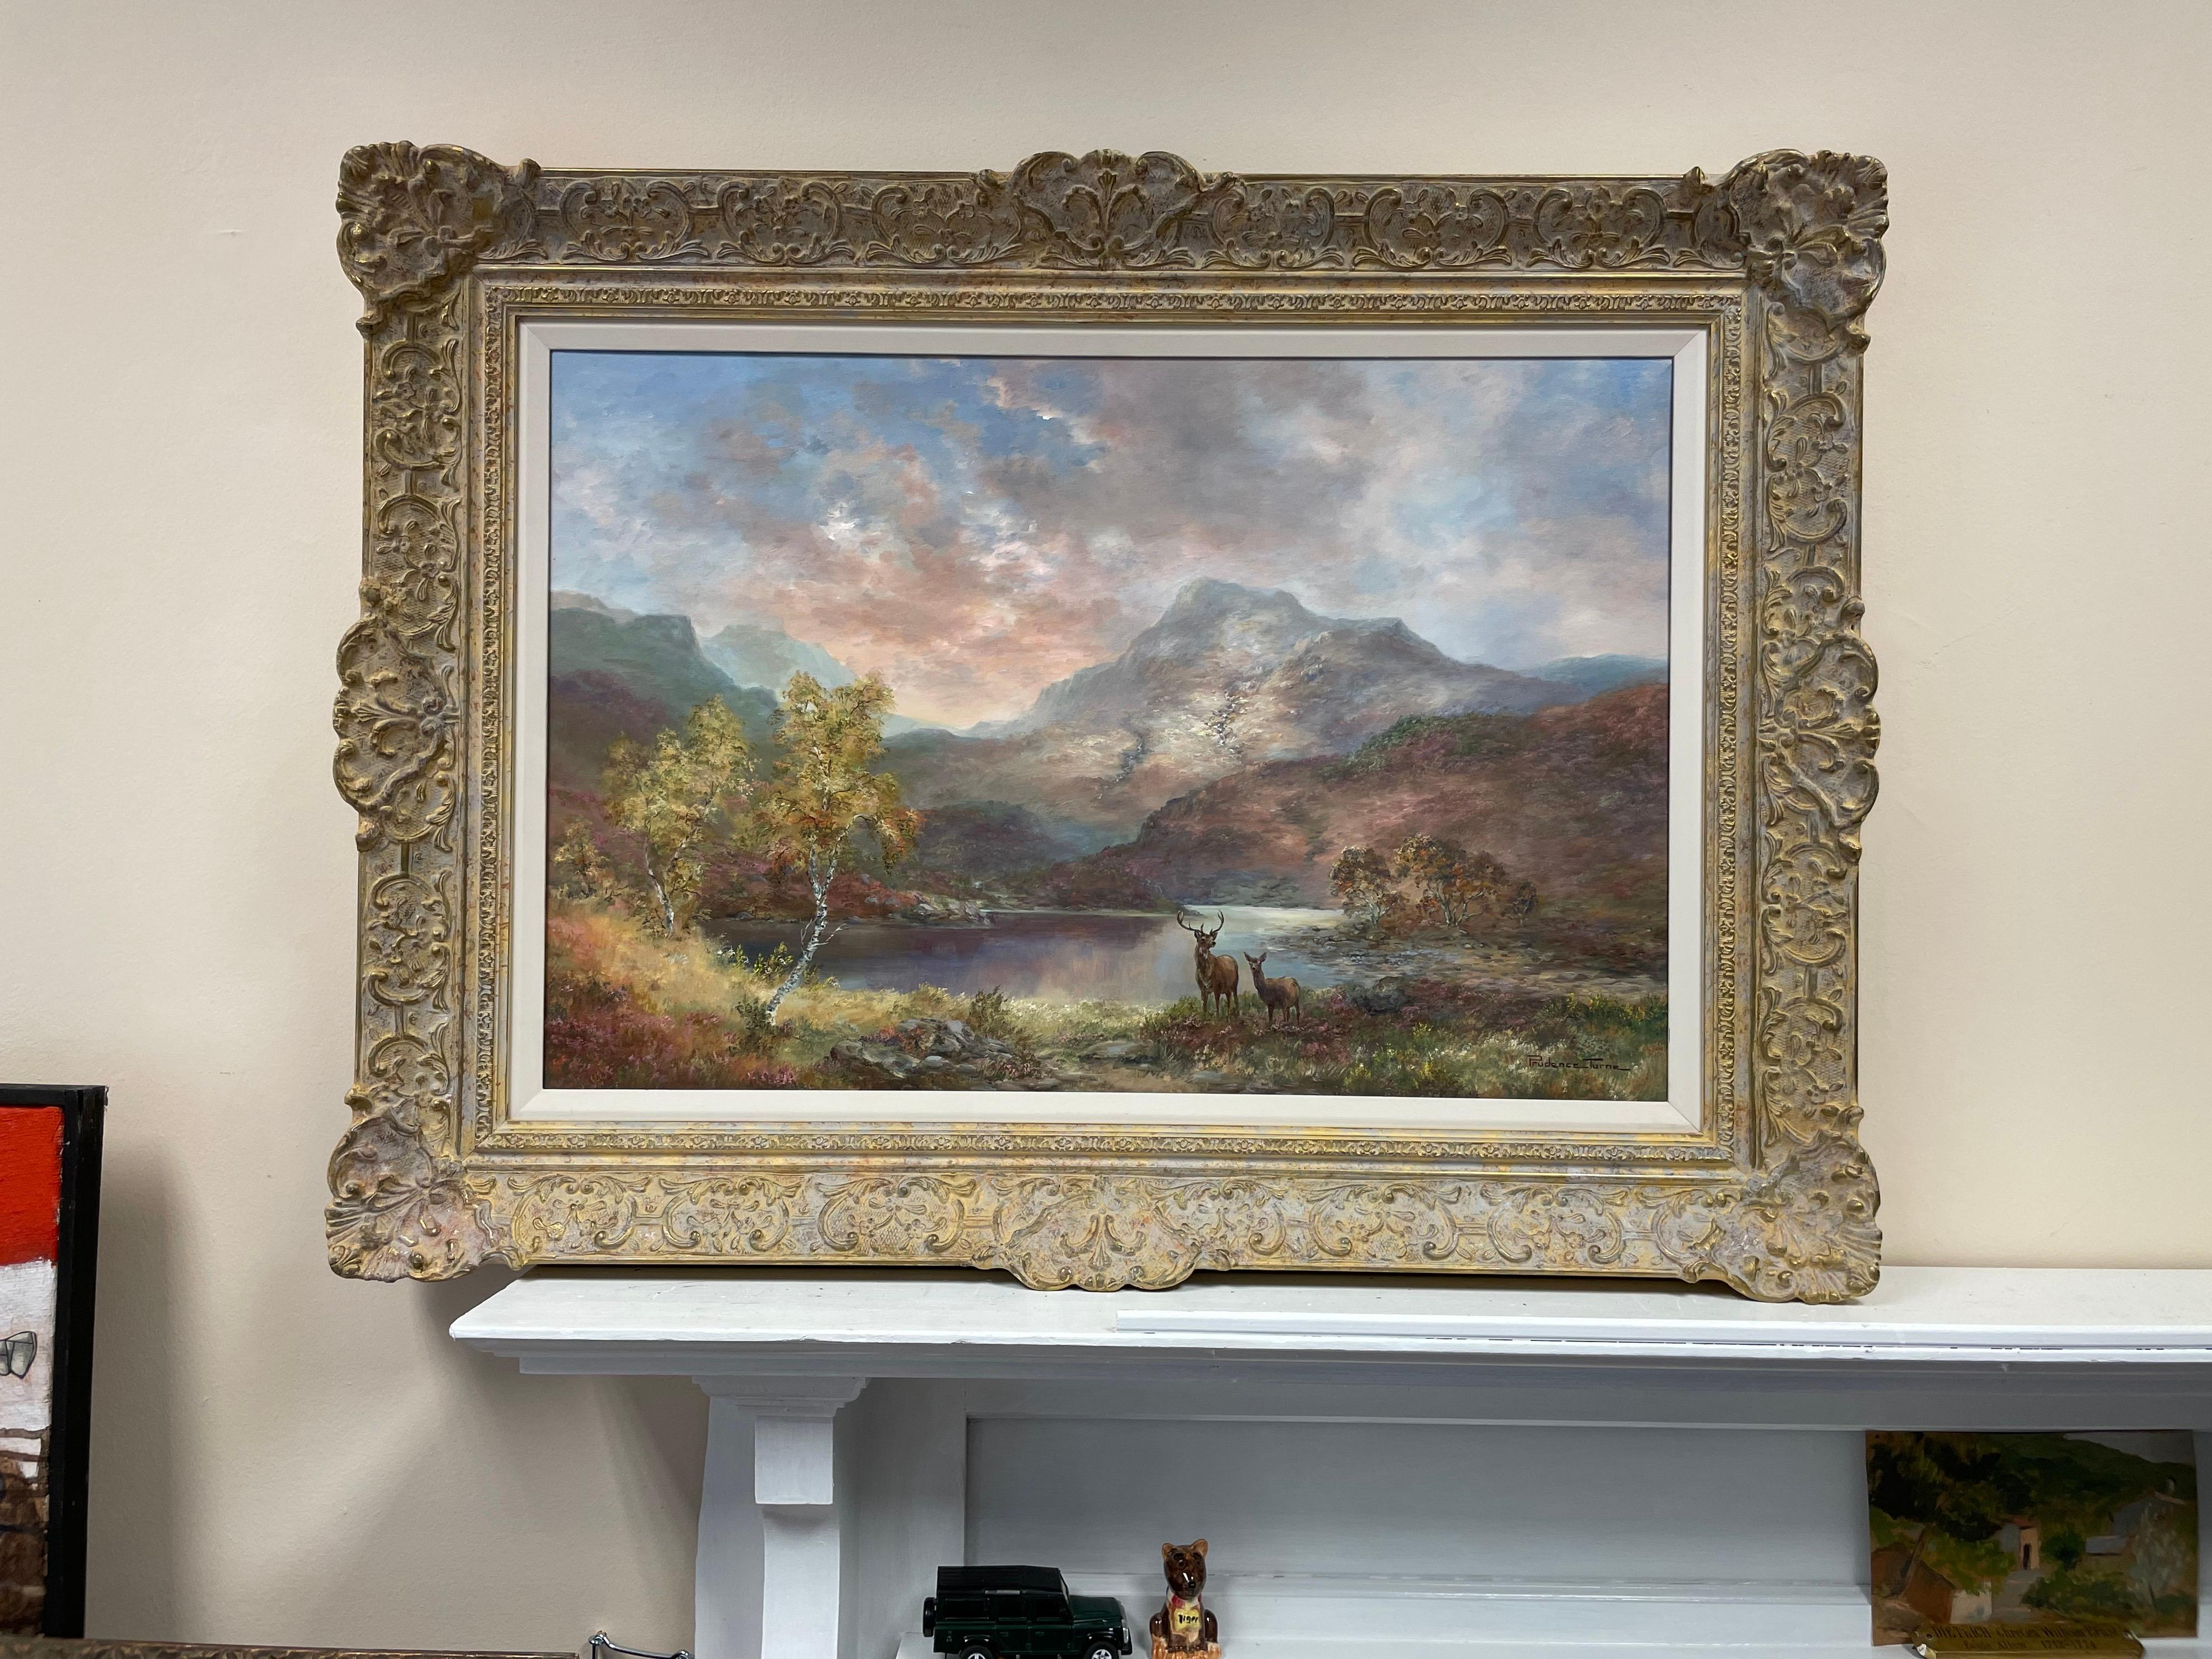 Large Signed Original Oil - Scottish Highlands Stag Deer Loch & Mountains - Painting by Prudence Turner